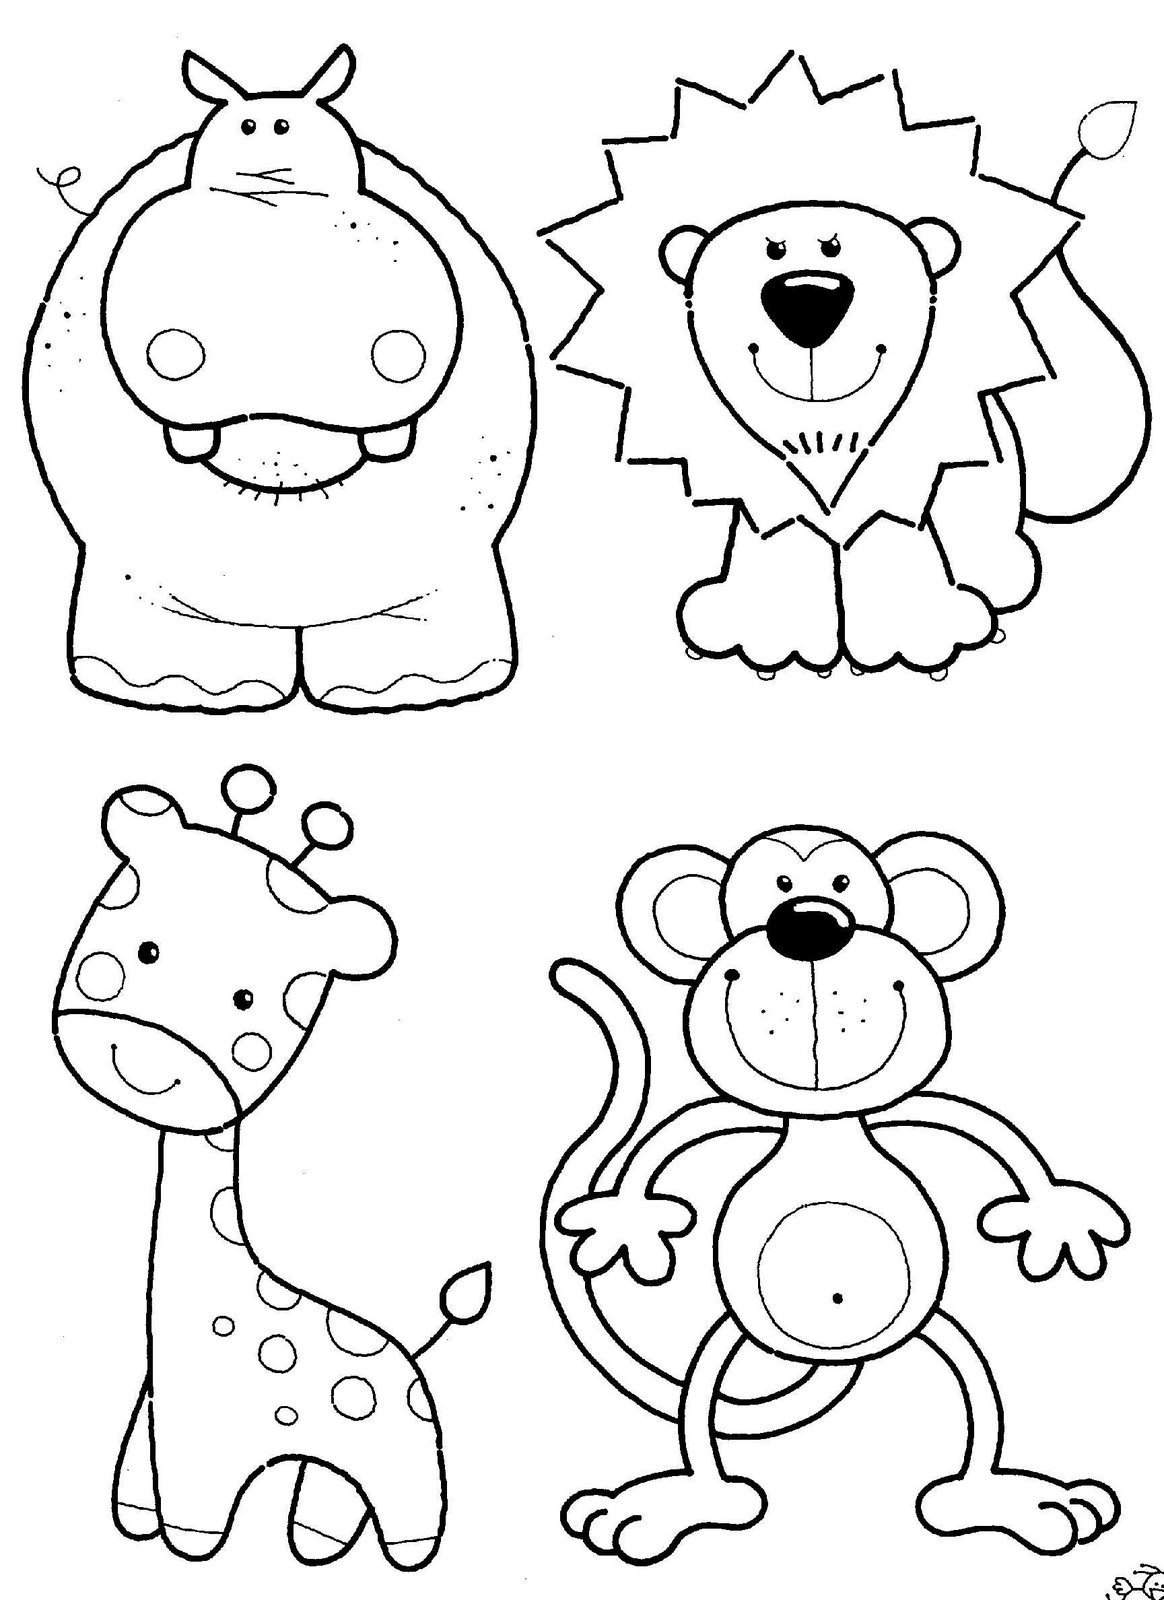 Animal Coloring Pages For Toddlers
 Coloring Ville